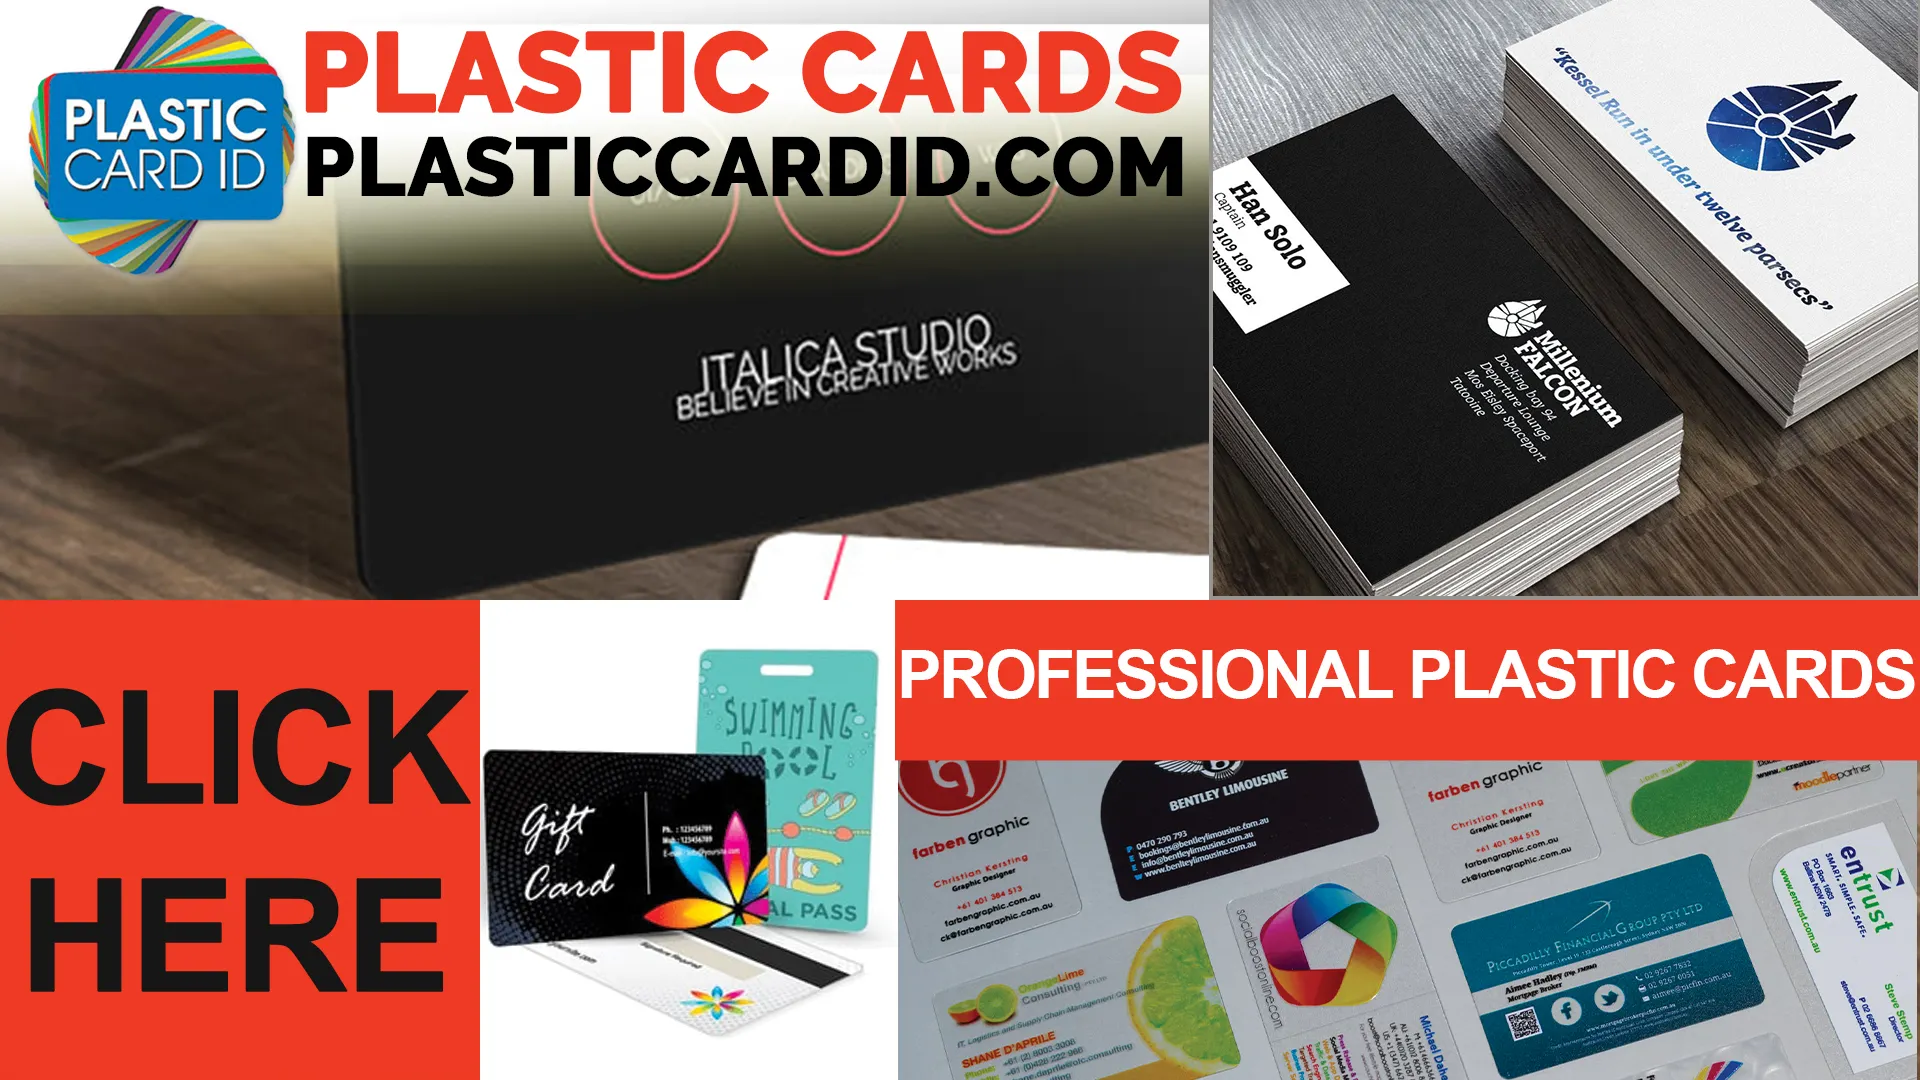 Making Your Brand Known with Signature Cards